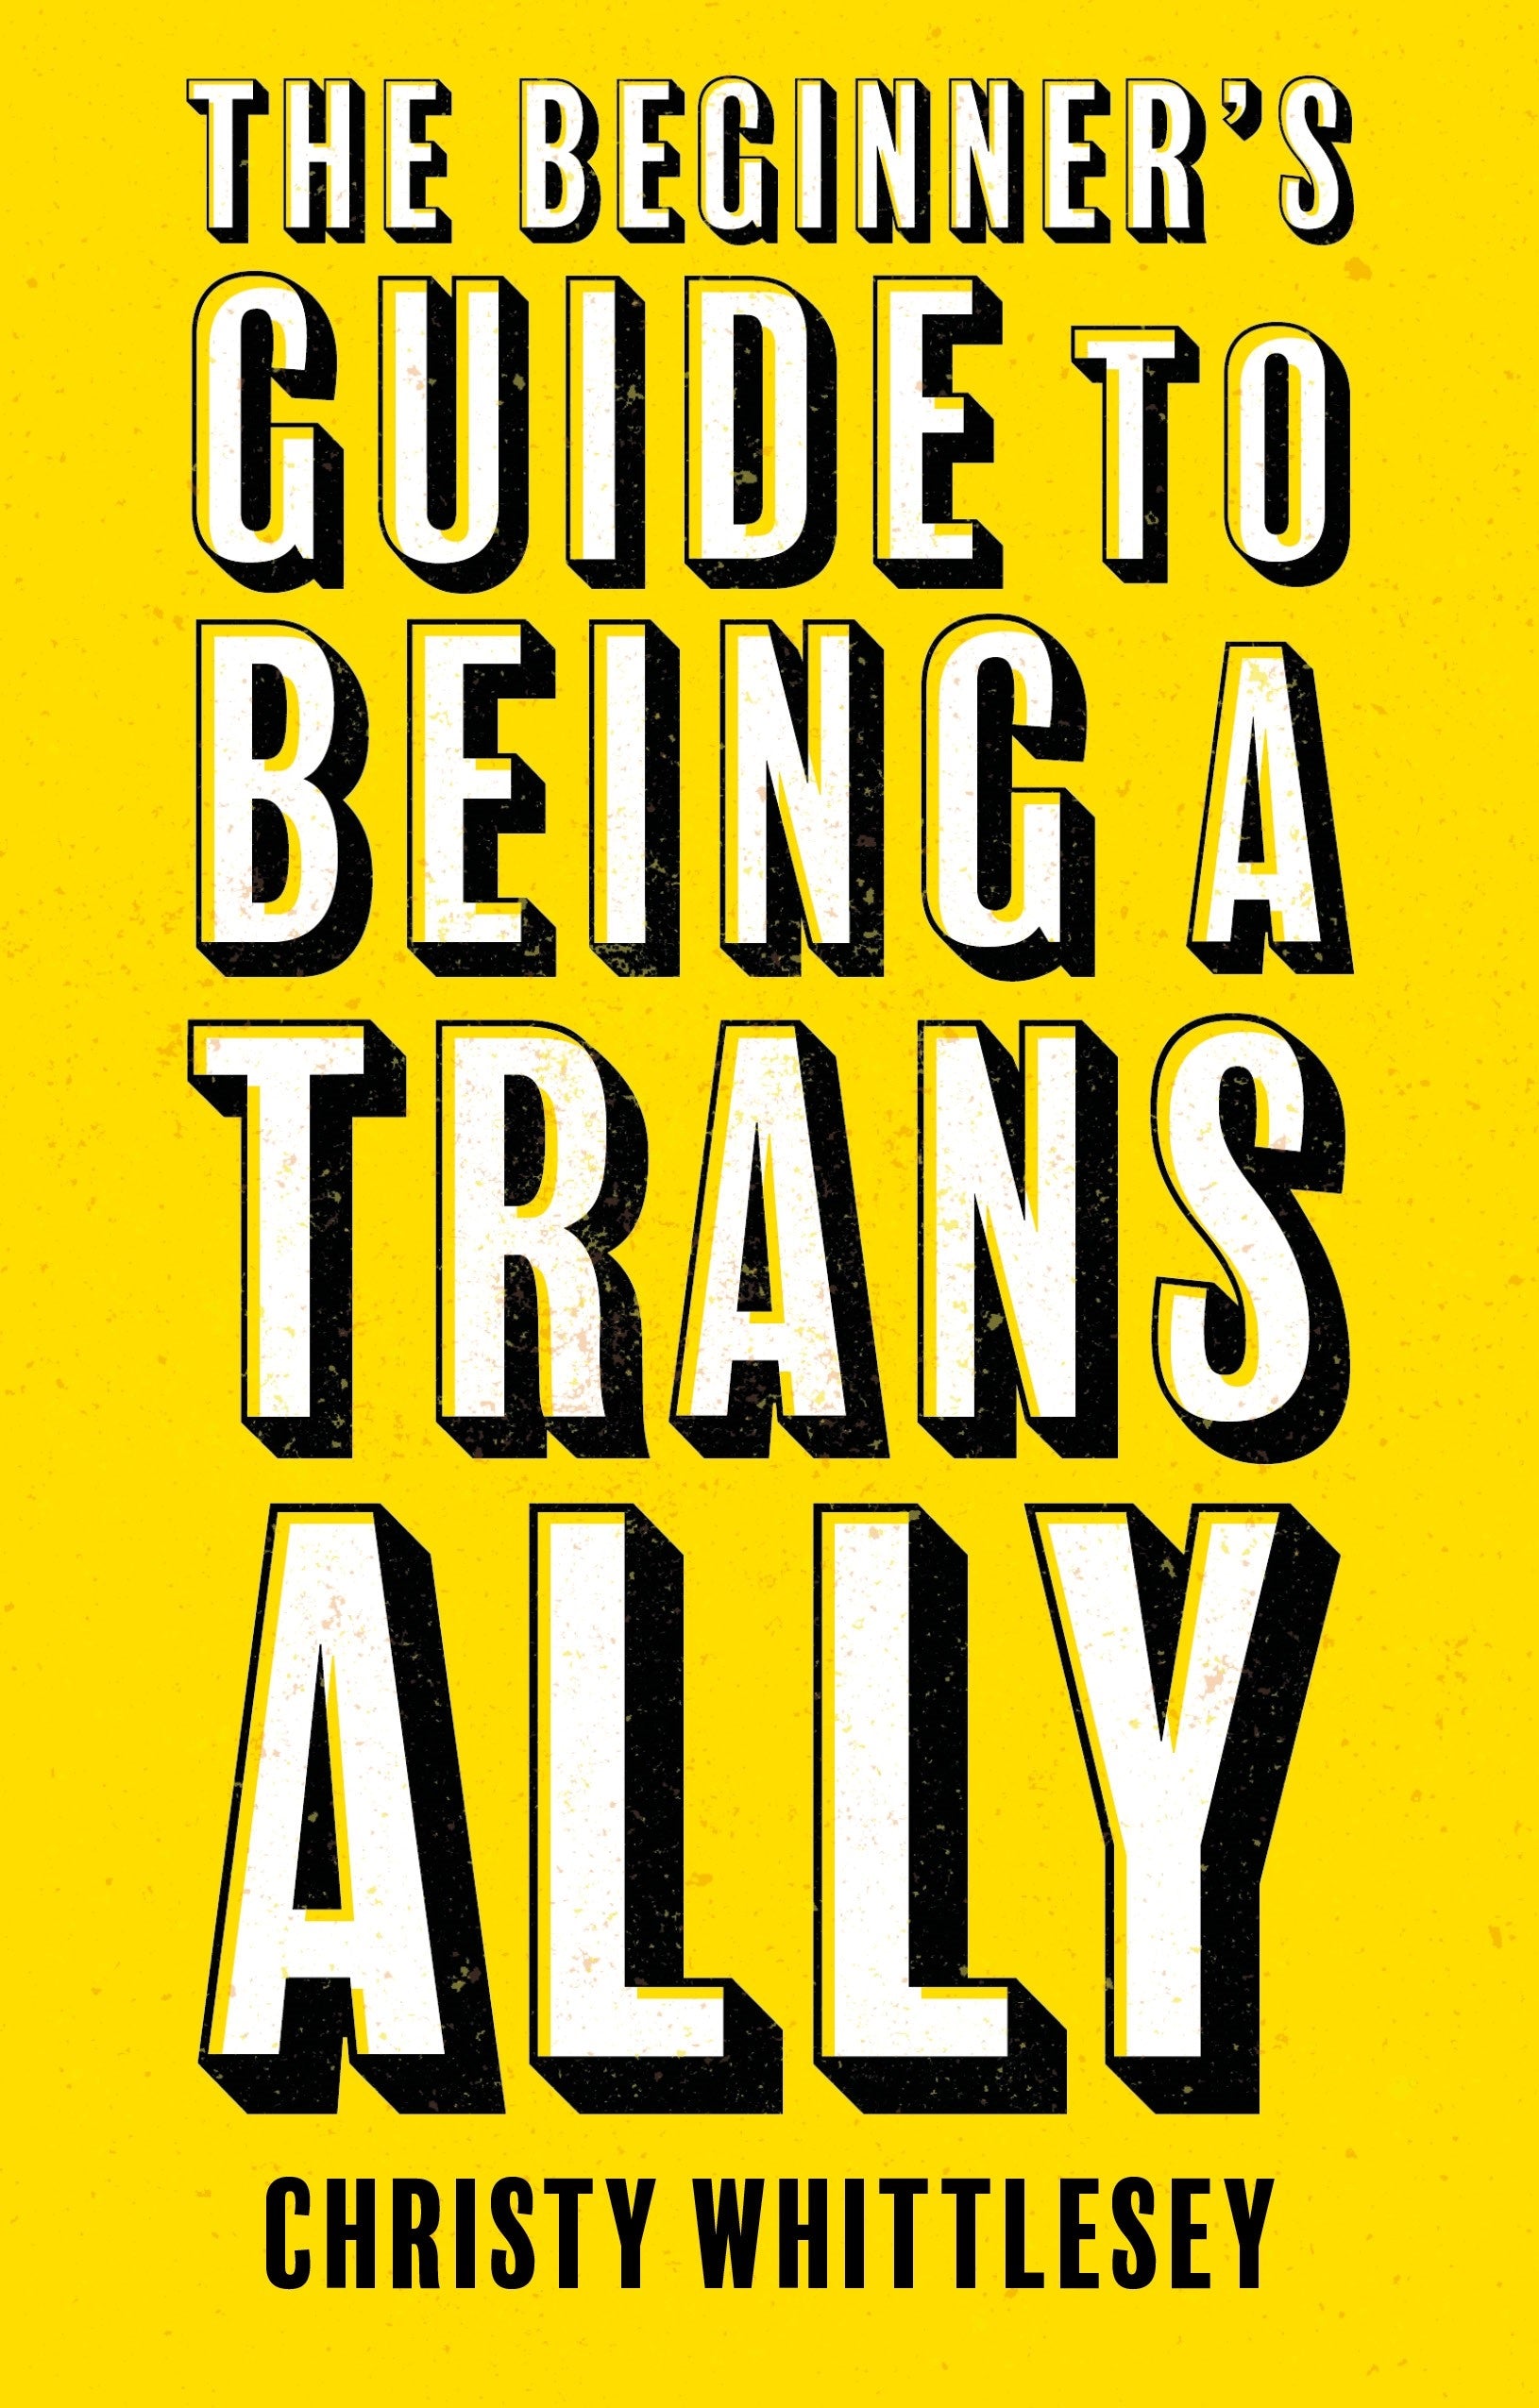 The Beginner's Guide to Being A Trans Ally by Christy Whittlesey